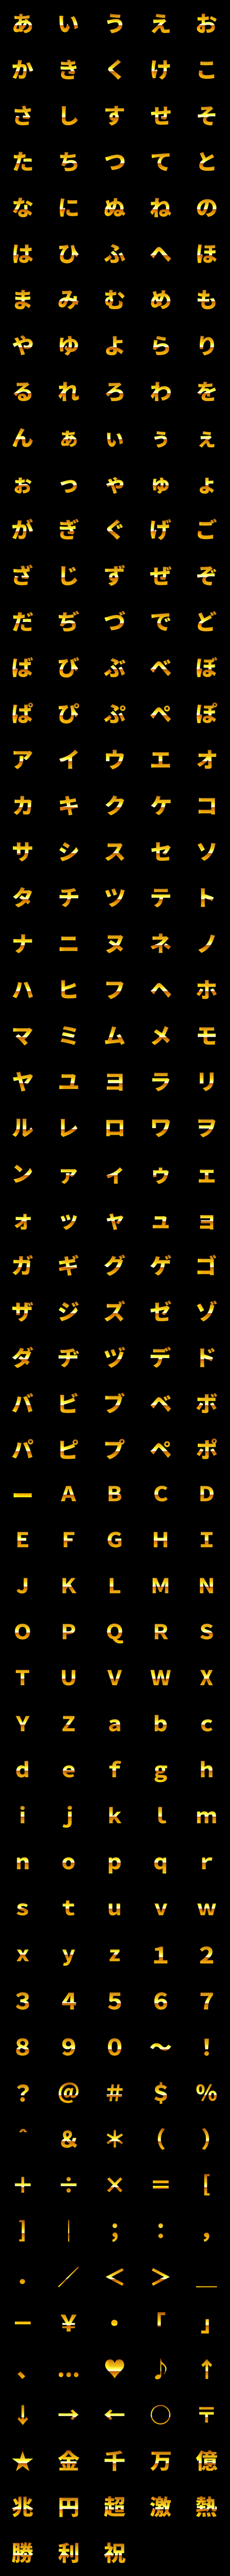 [LINE絵文字]動く！激アツ！ゴージャス金文字の画像一覧